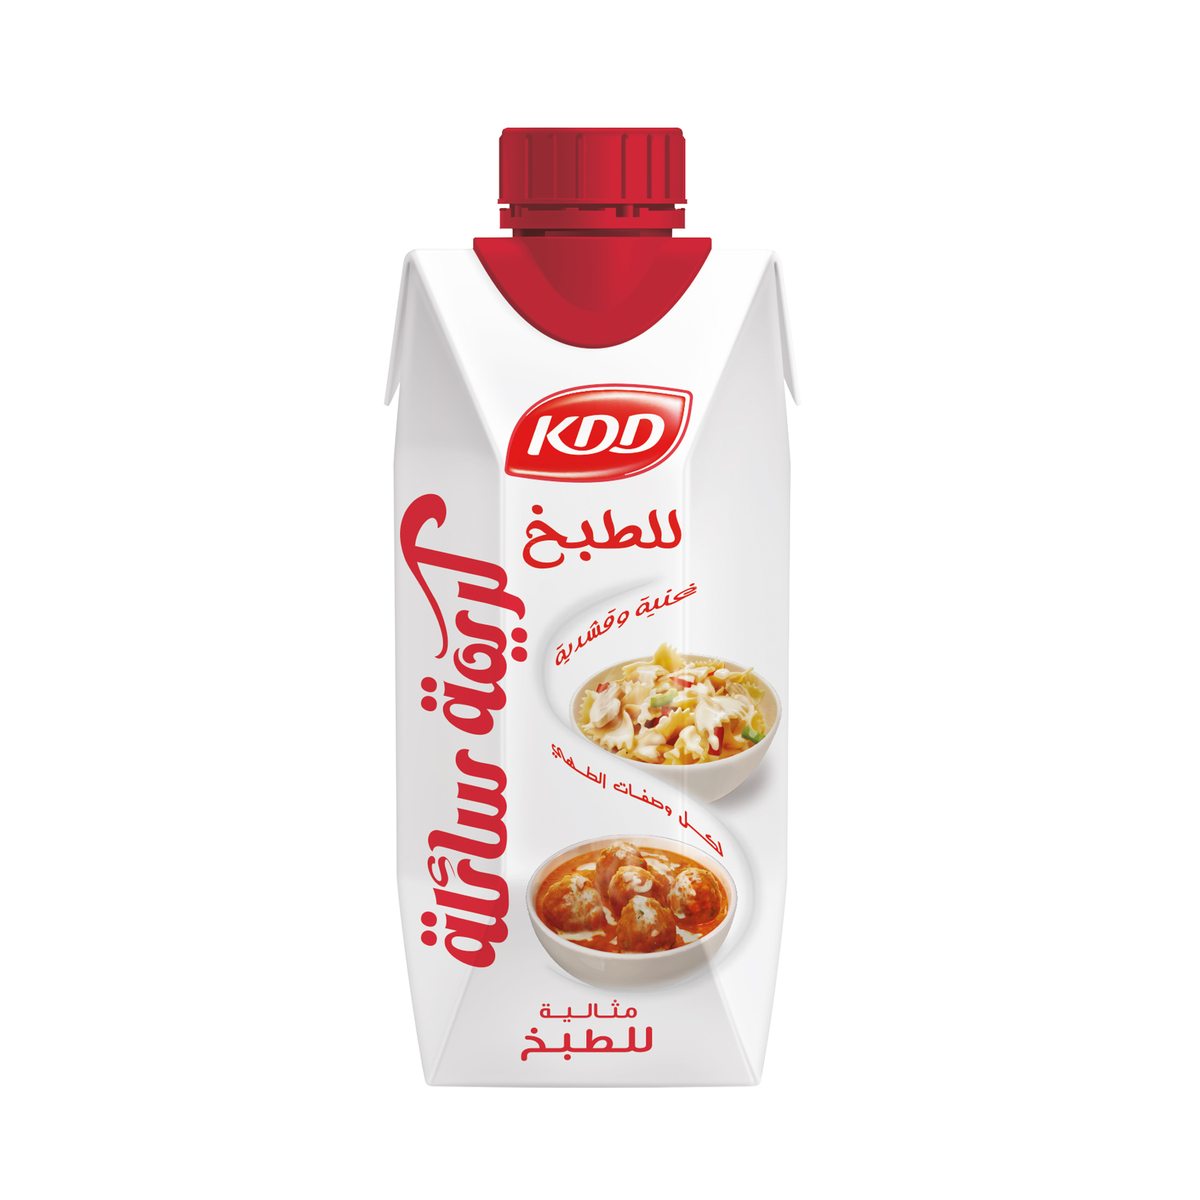 KDD Cooking Cream 250 ml